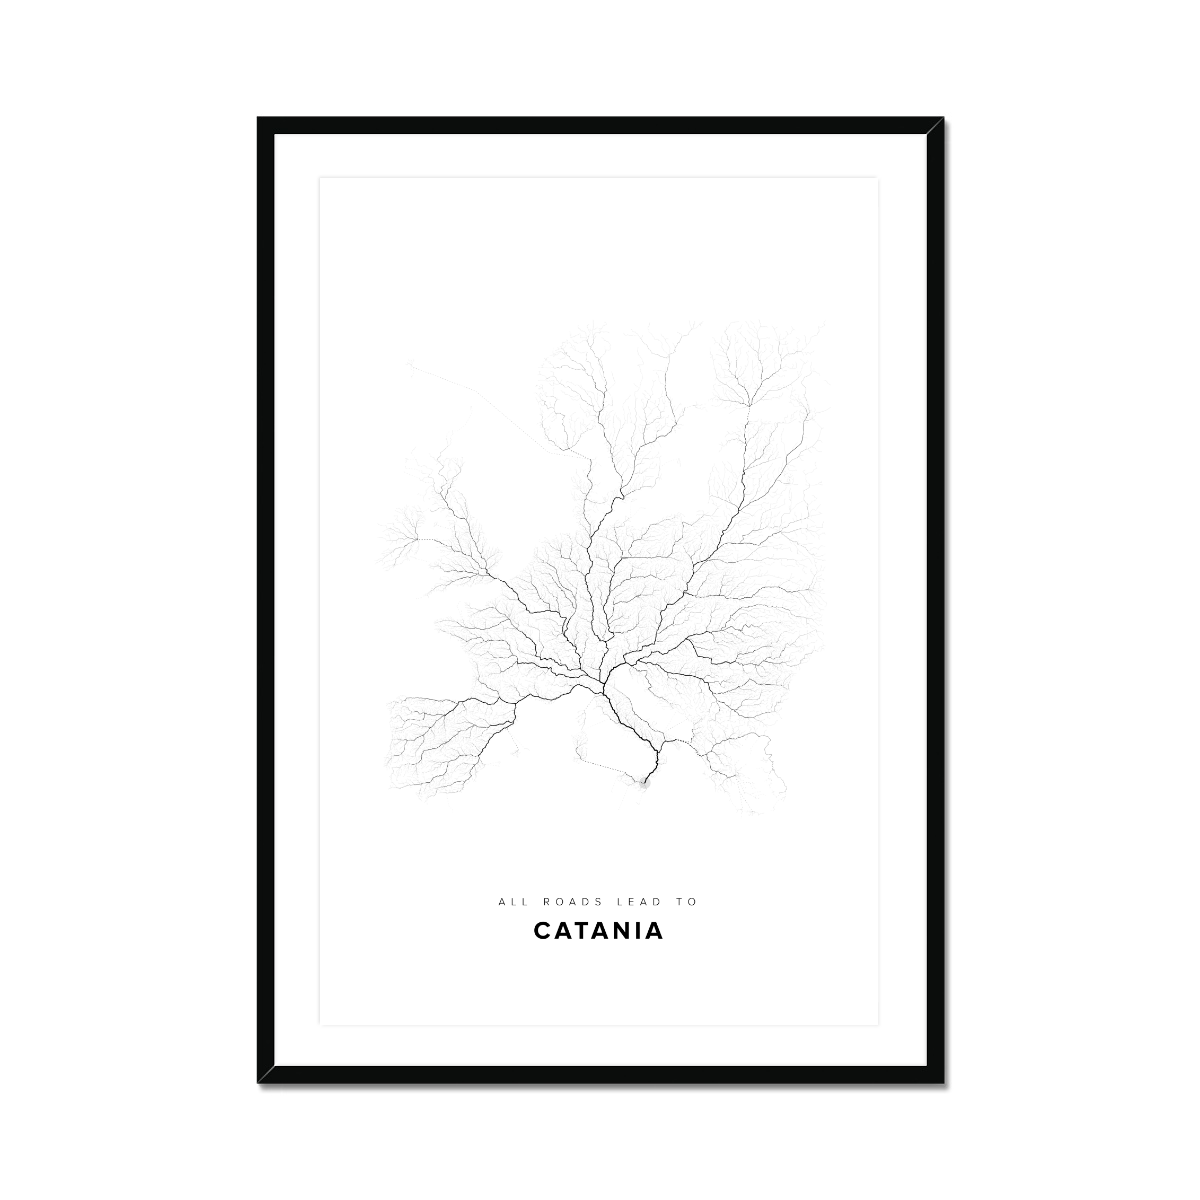 All roads lead to Catania (Italy) Fine Art Map Print